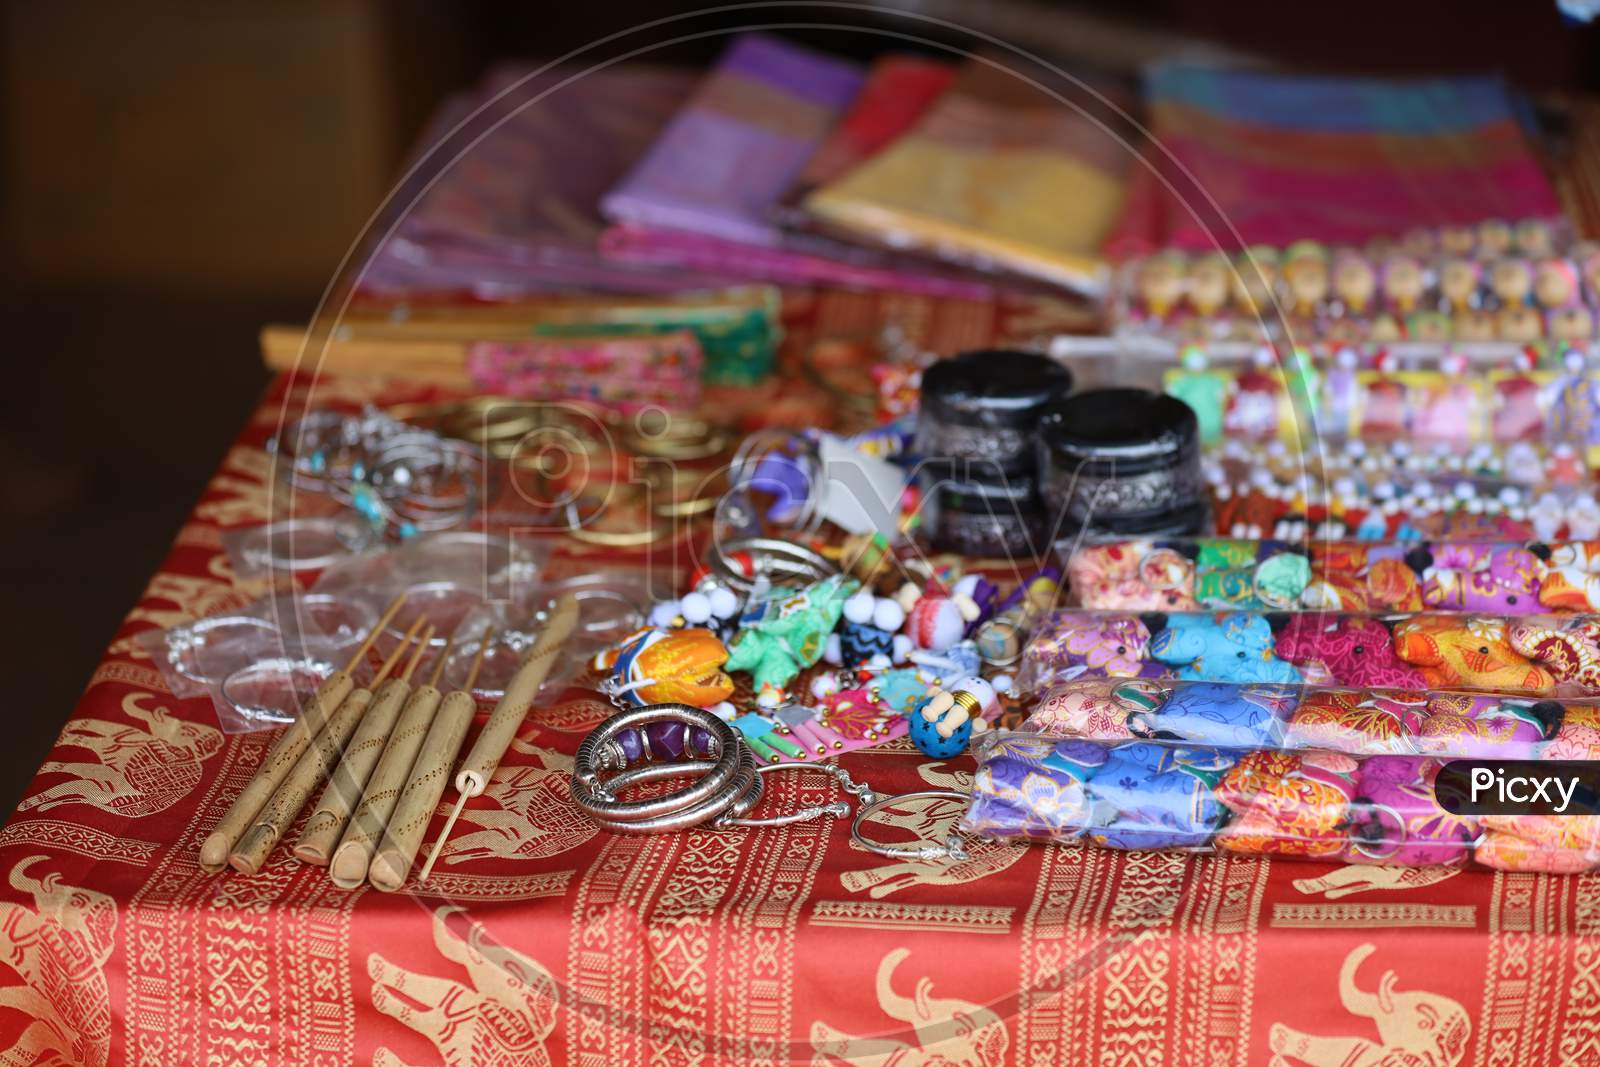 Bangle Items on a Display Table in a Shop